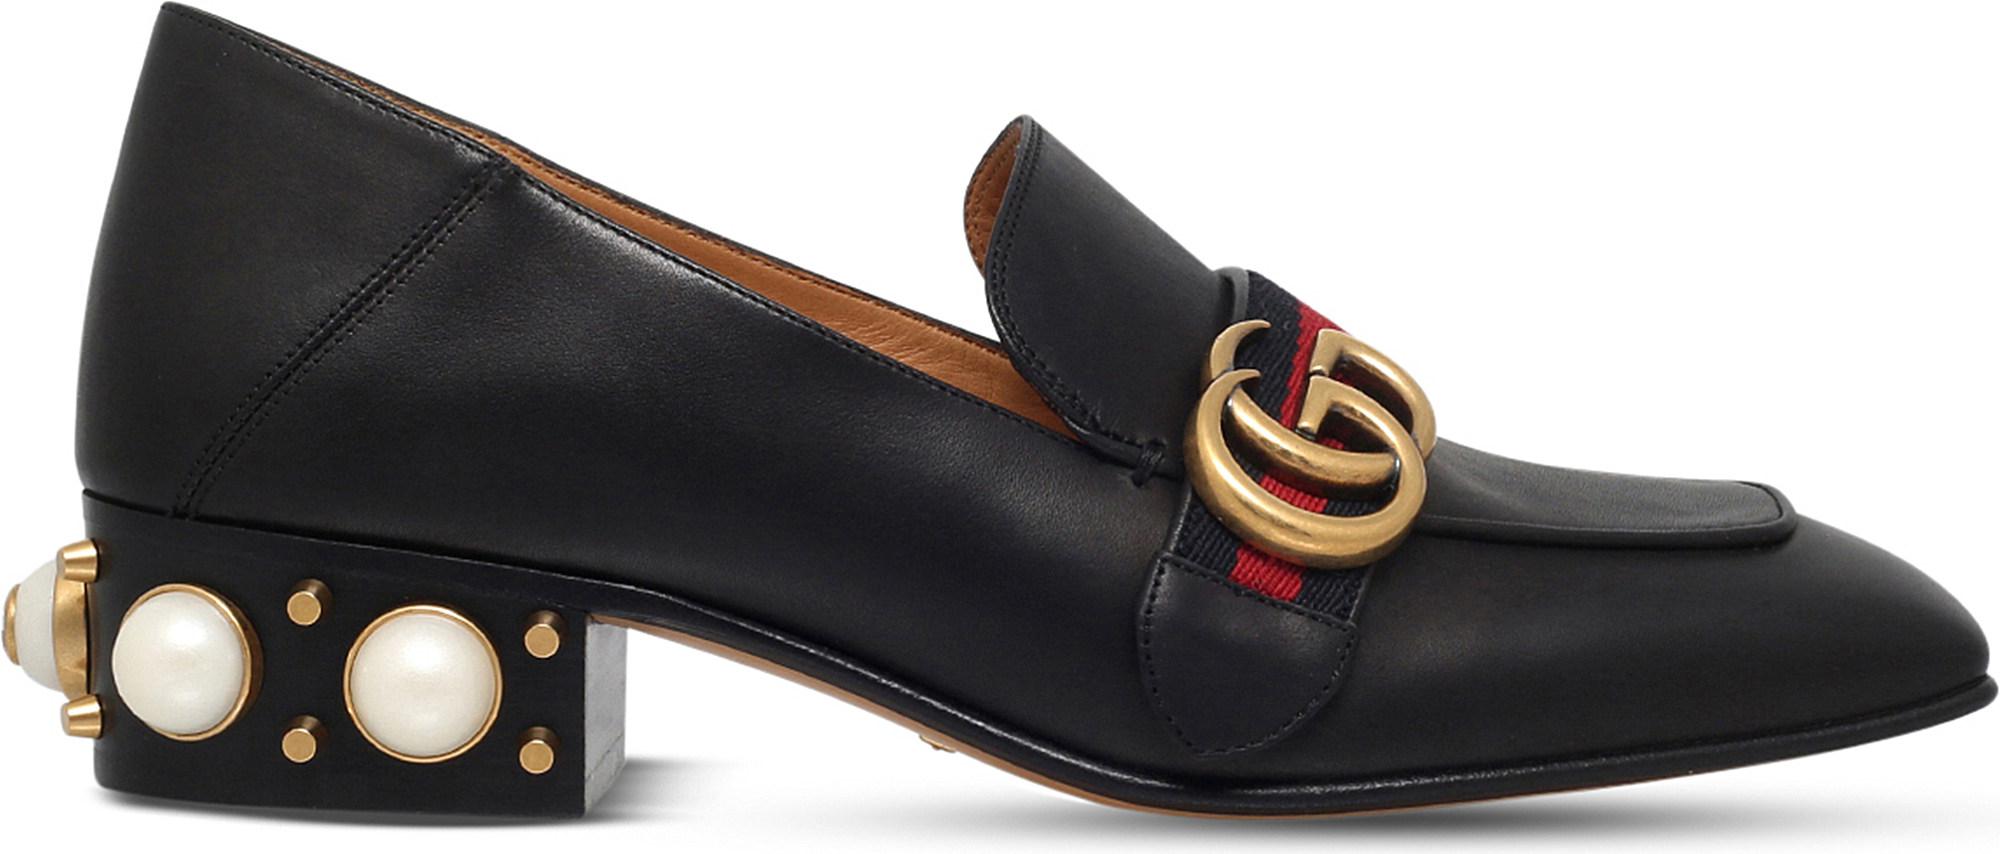 Lyst - Gucci Embellished-Heel Leather Loafers in Black - Save 15. ...